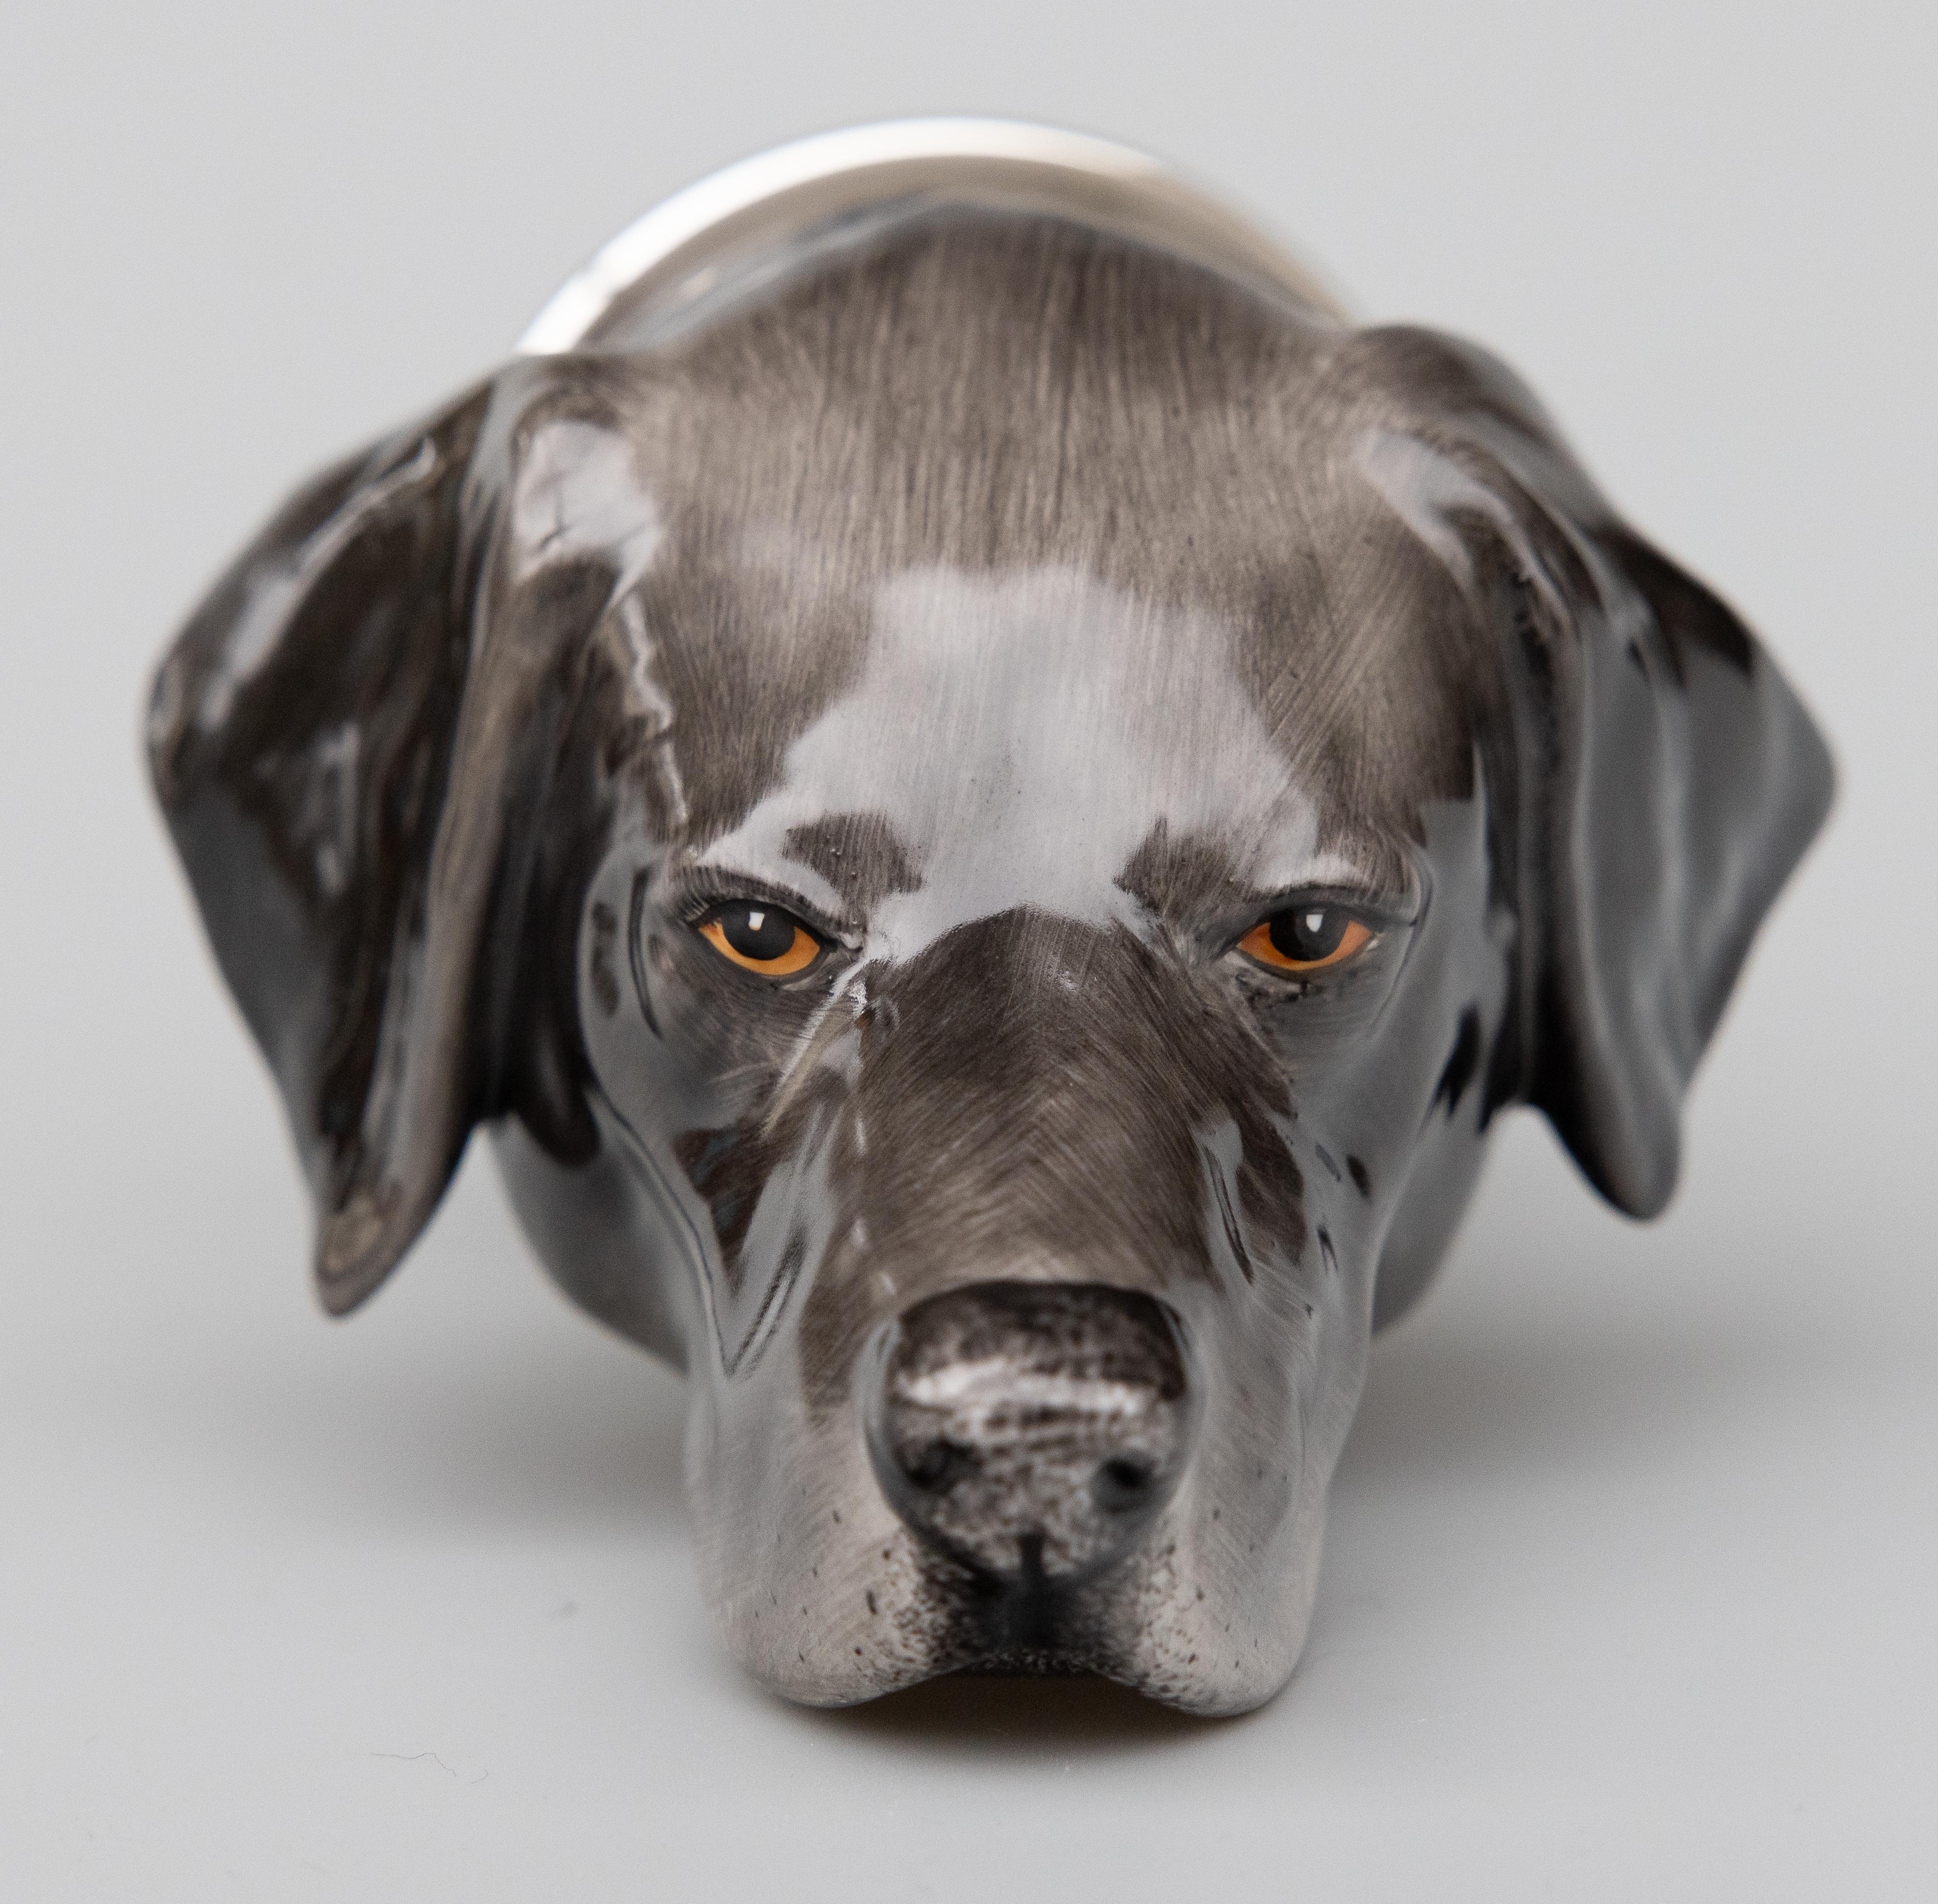 A fine rare vintage English staffordshire great dane hunting dog porcelain stirrup cup produced by Royale Stratford, in England, circa 1980. Acquired from a collector's estate in England. This charming stirrup cup is in the form of a Great Dane